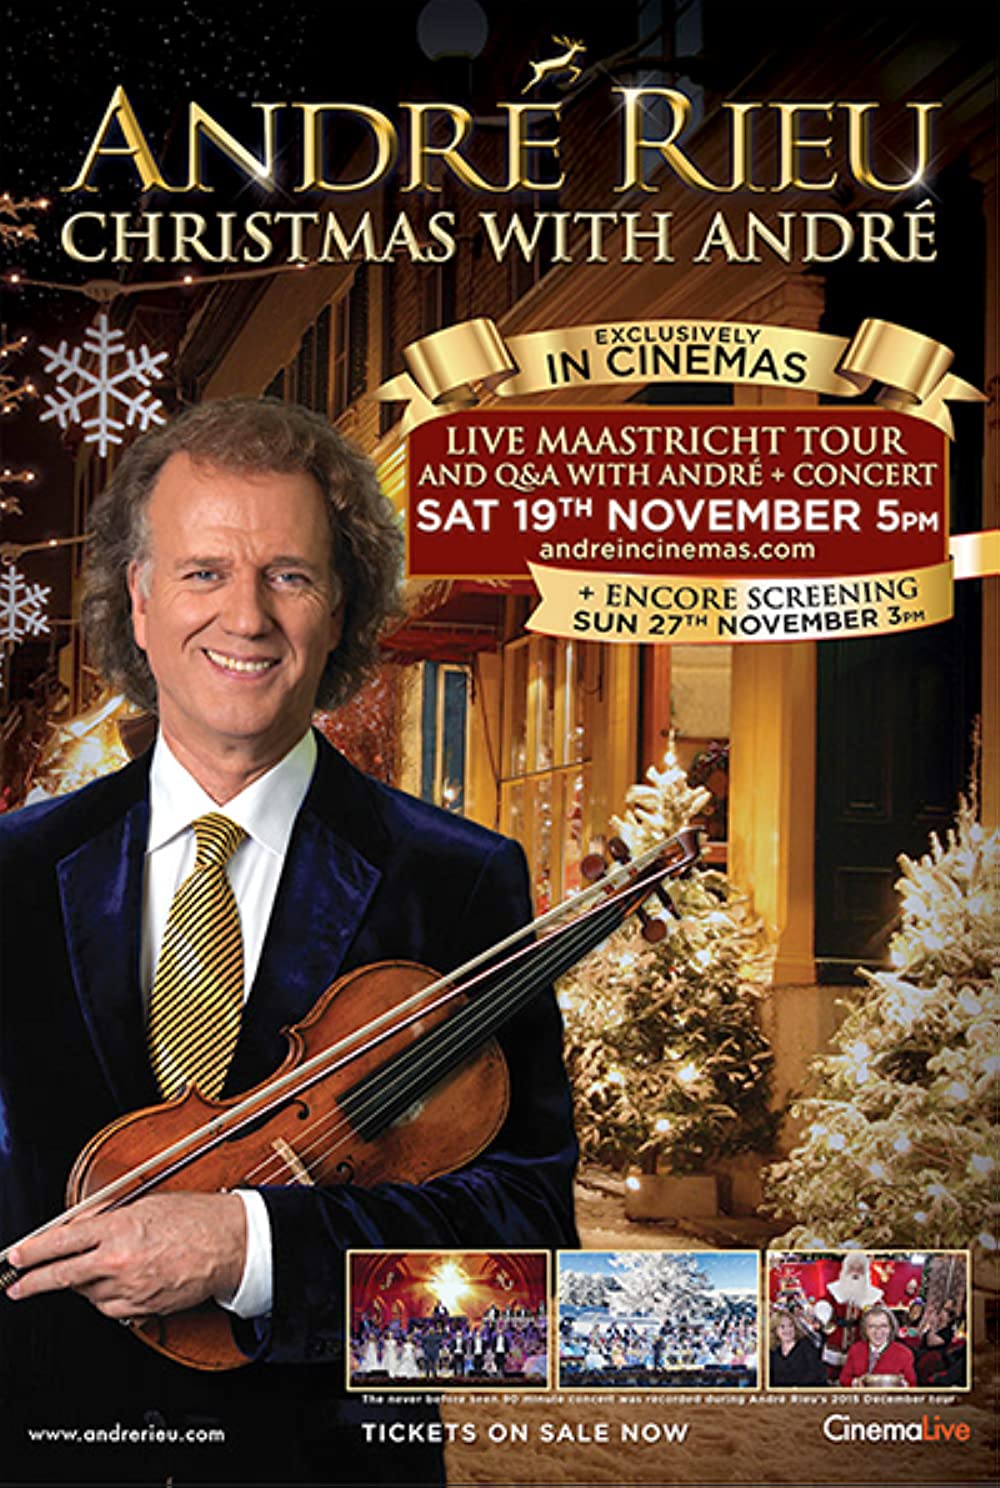 Andr? Rieu - Christmas with Andr?